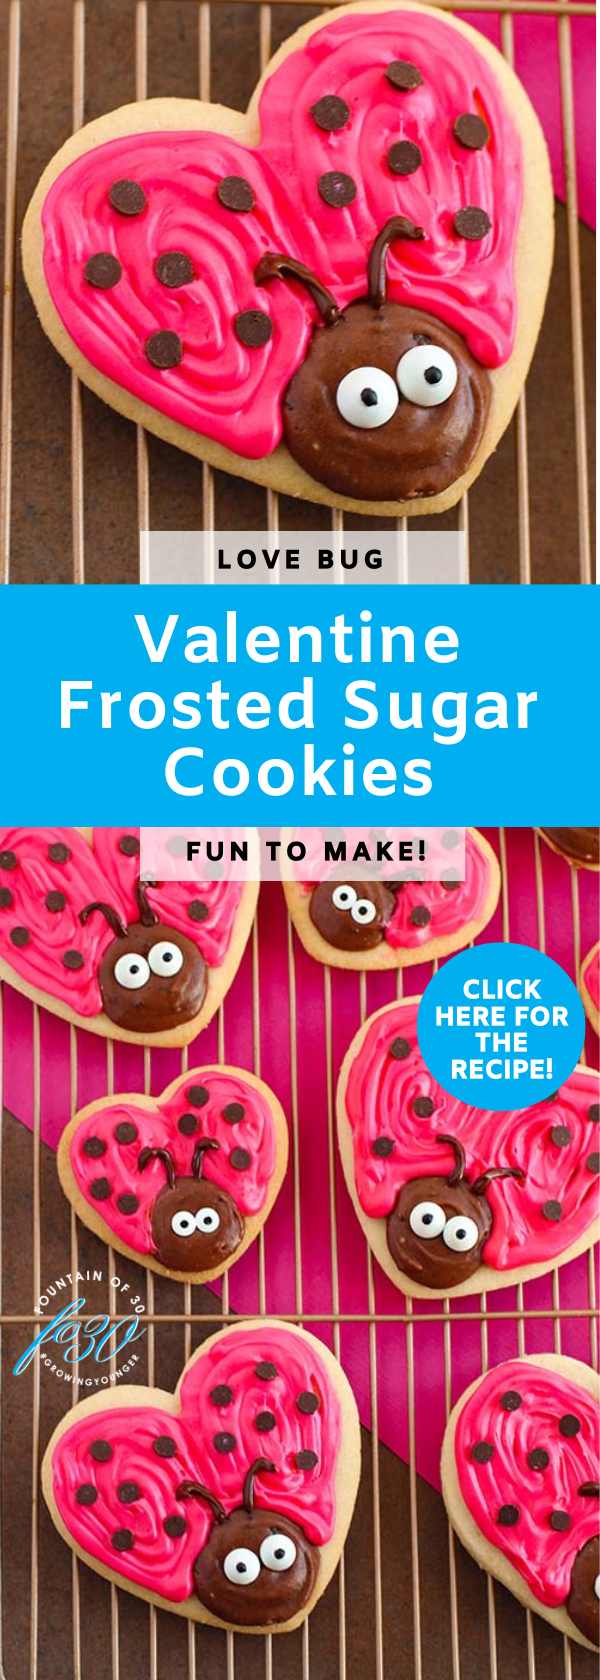 love bug frosted sugar cookiesfor valentine's day fountainof30